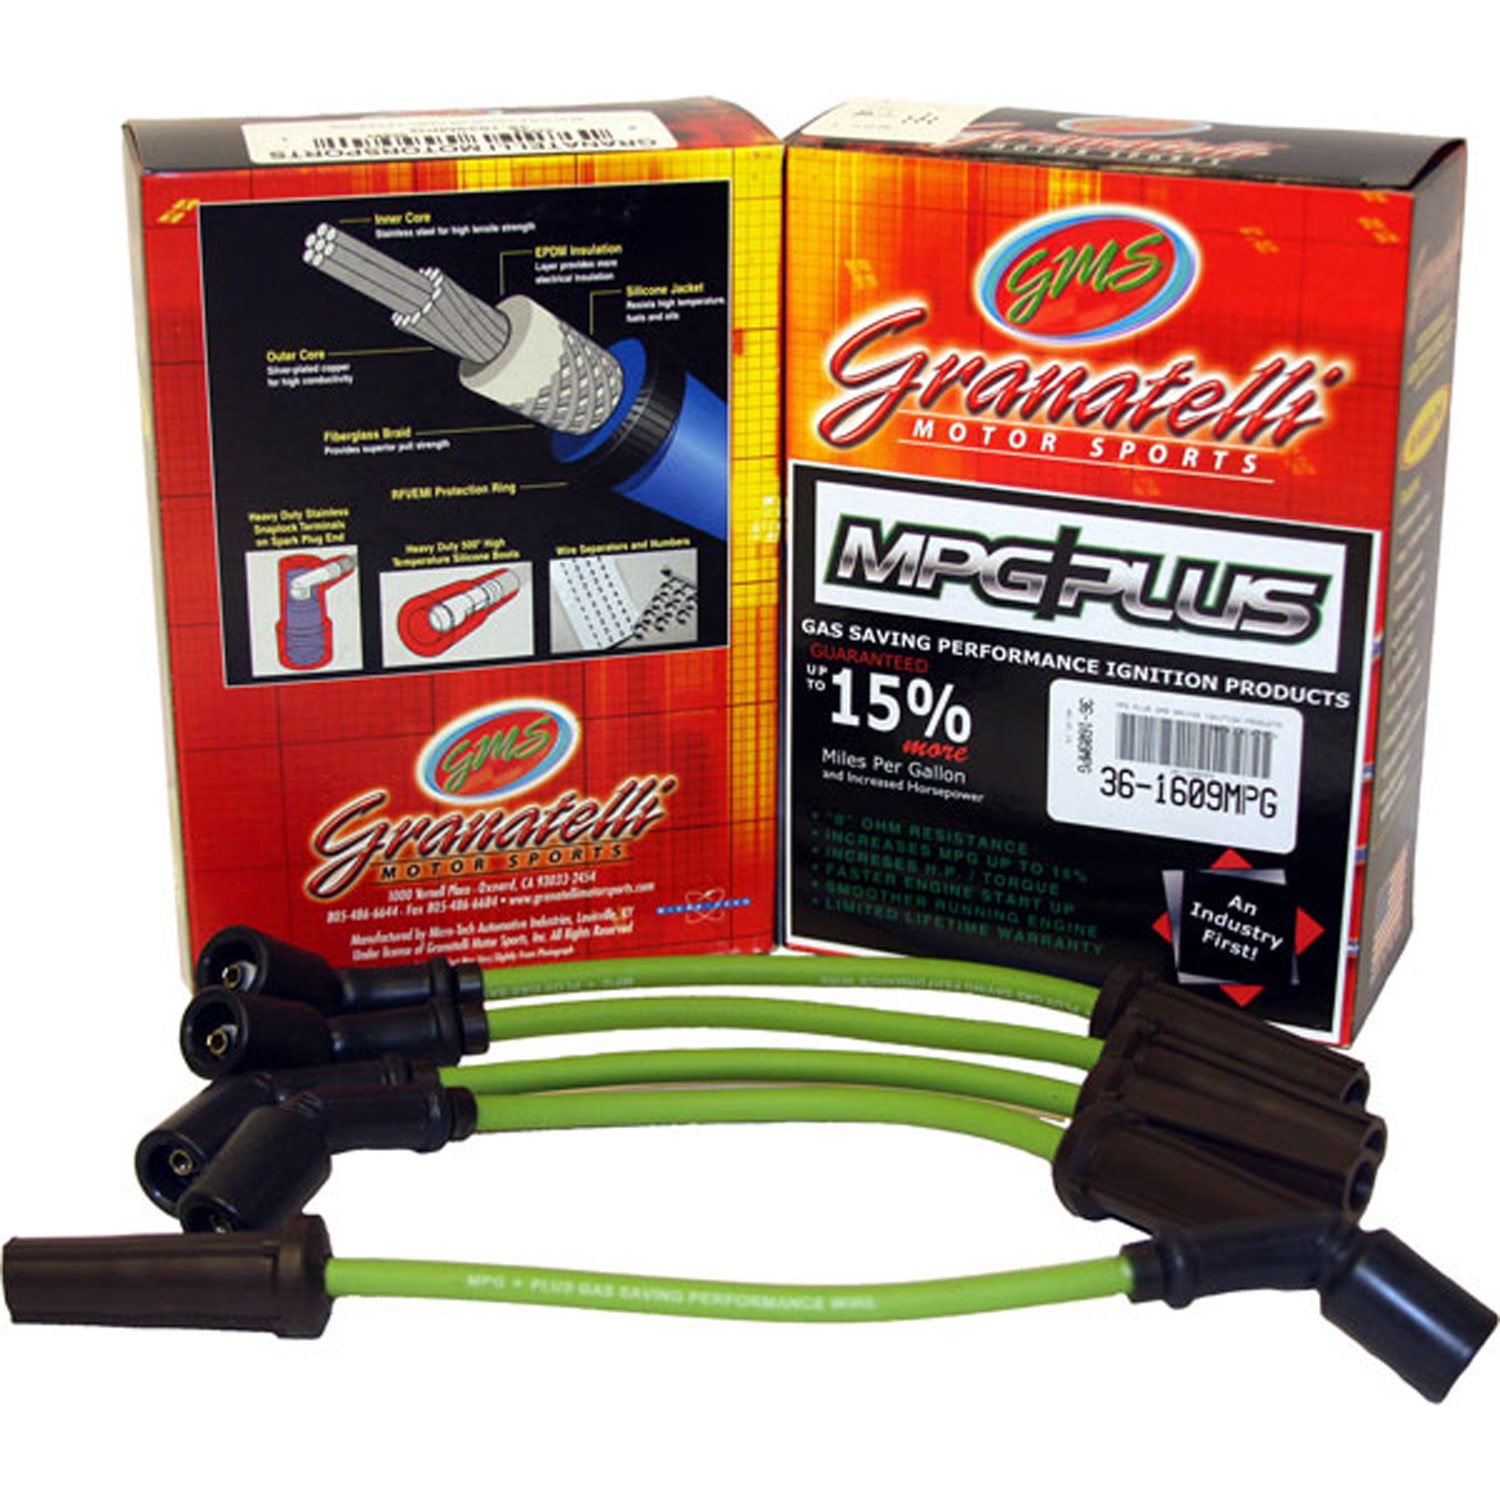 MPG Wires ACURA CL 6CYL 3.0L 97-99